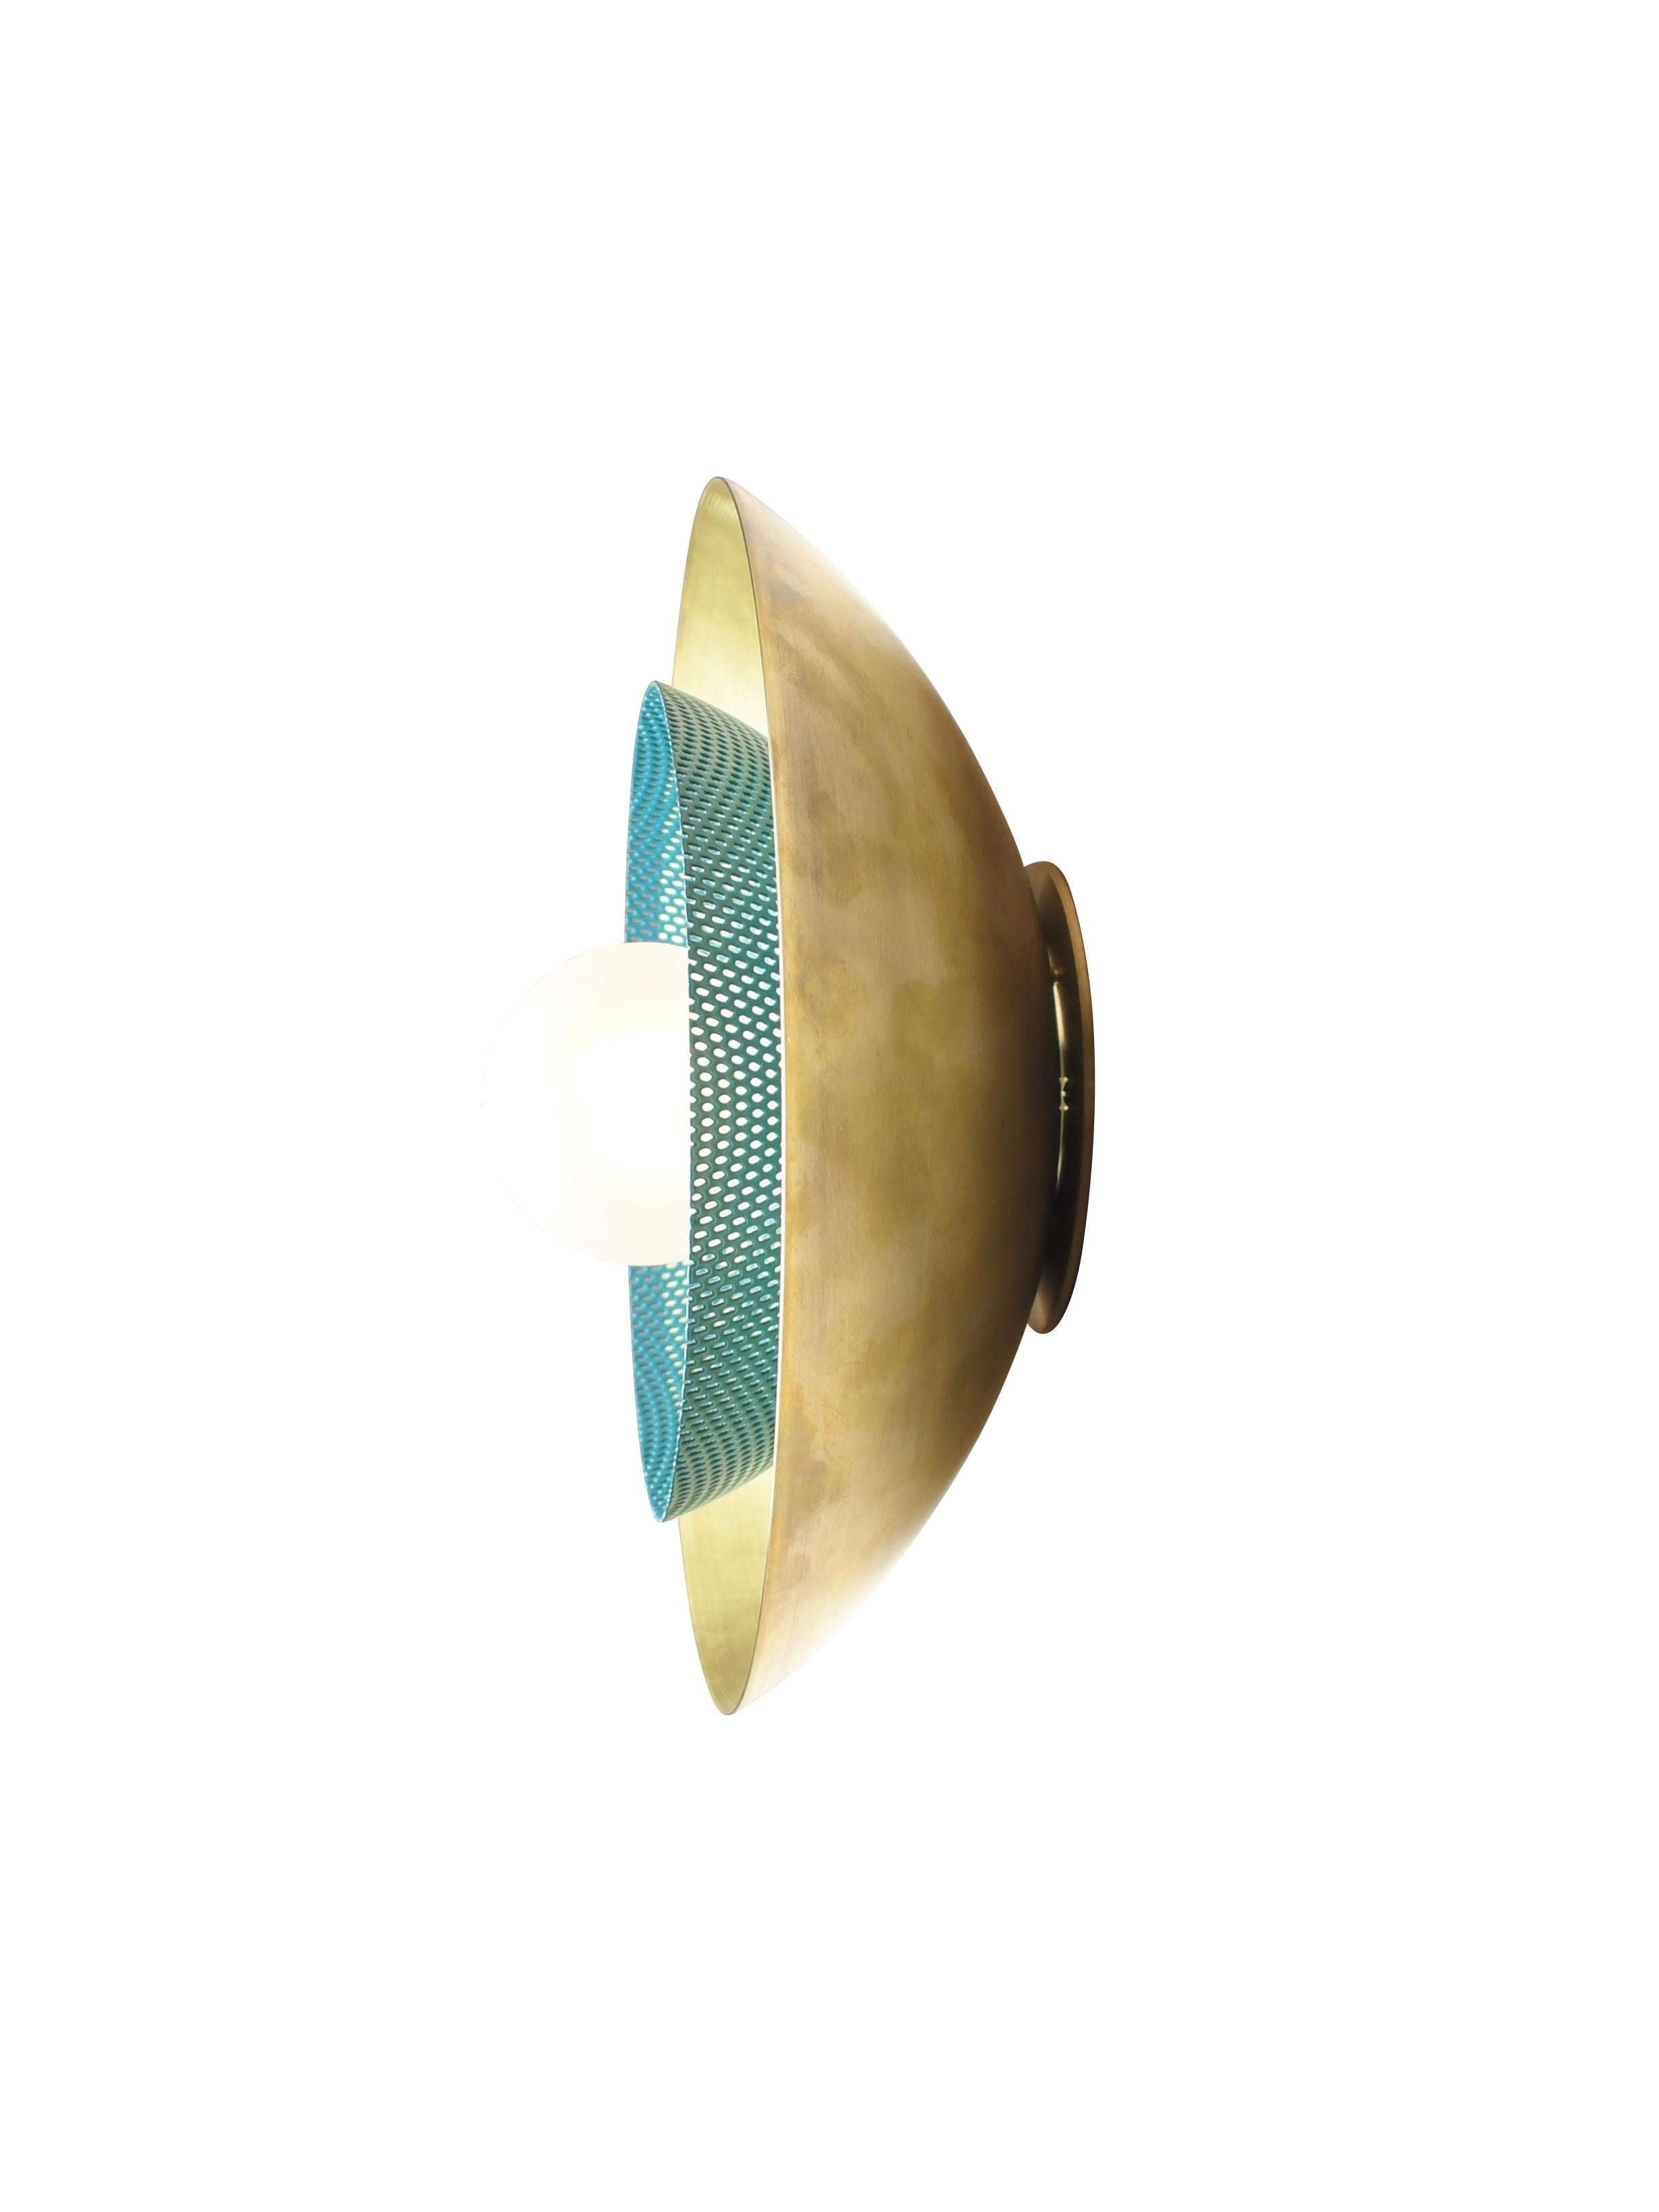 teal wall sconce